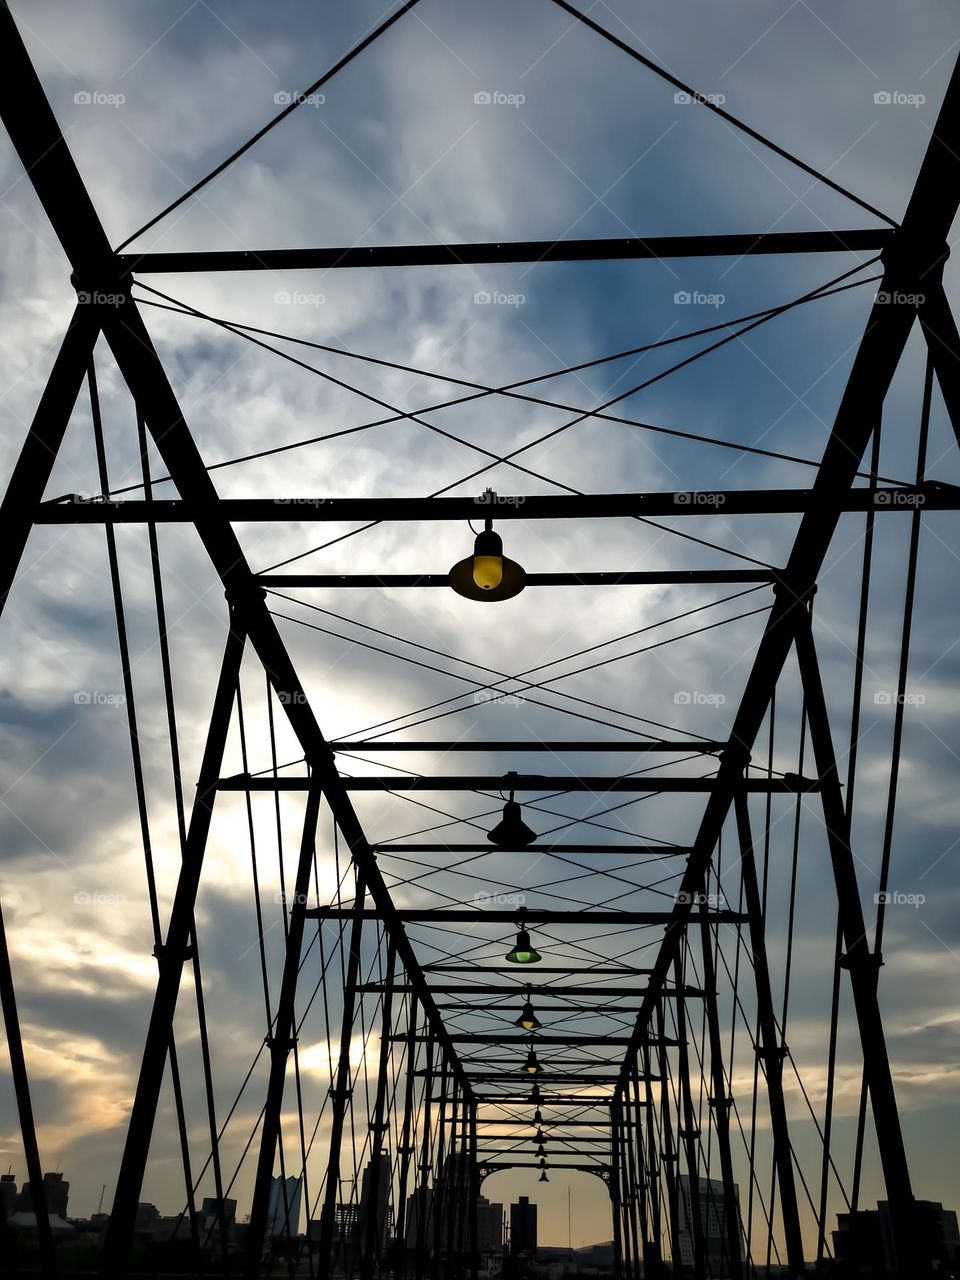 The architecture of an old bridge at sunset designed with many rectangles.